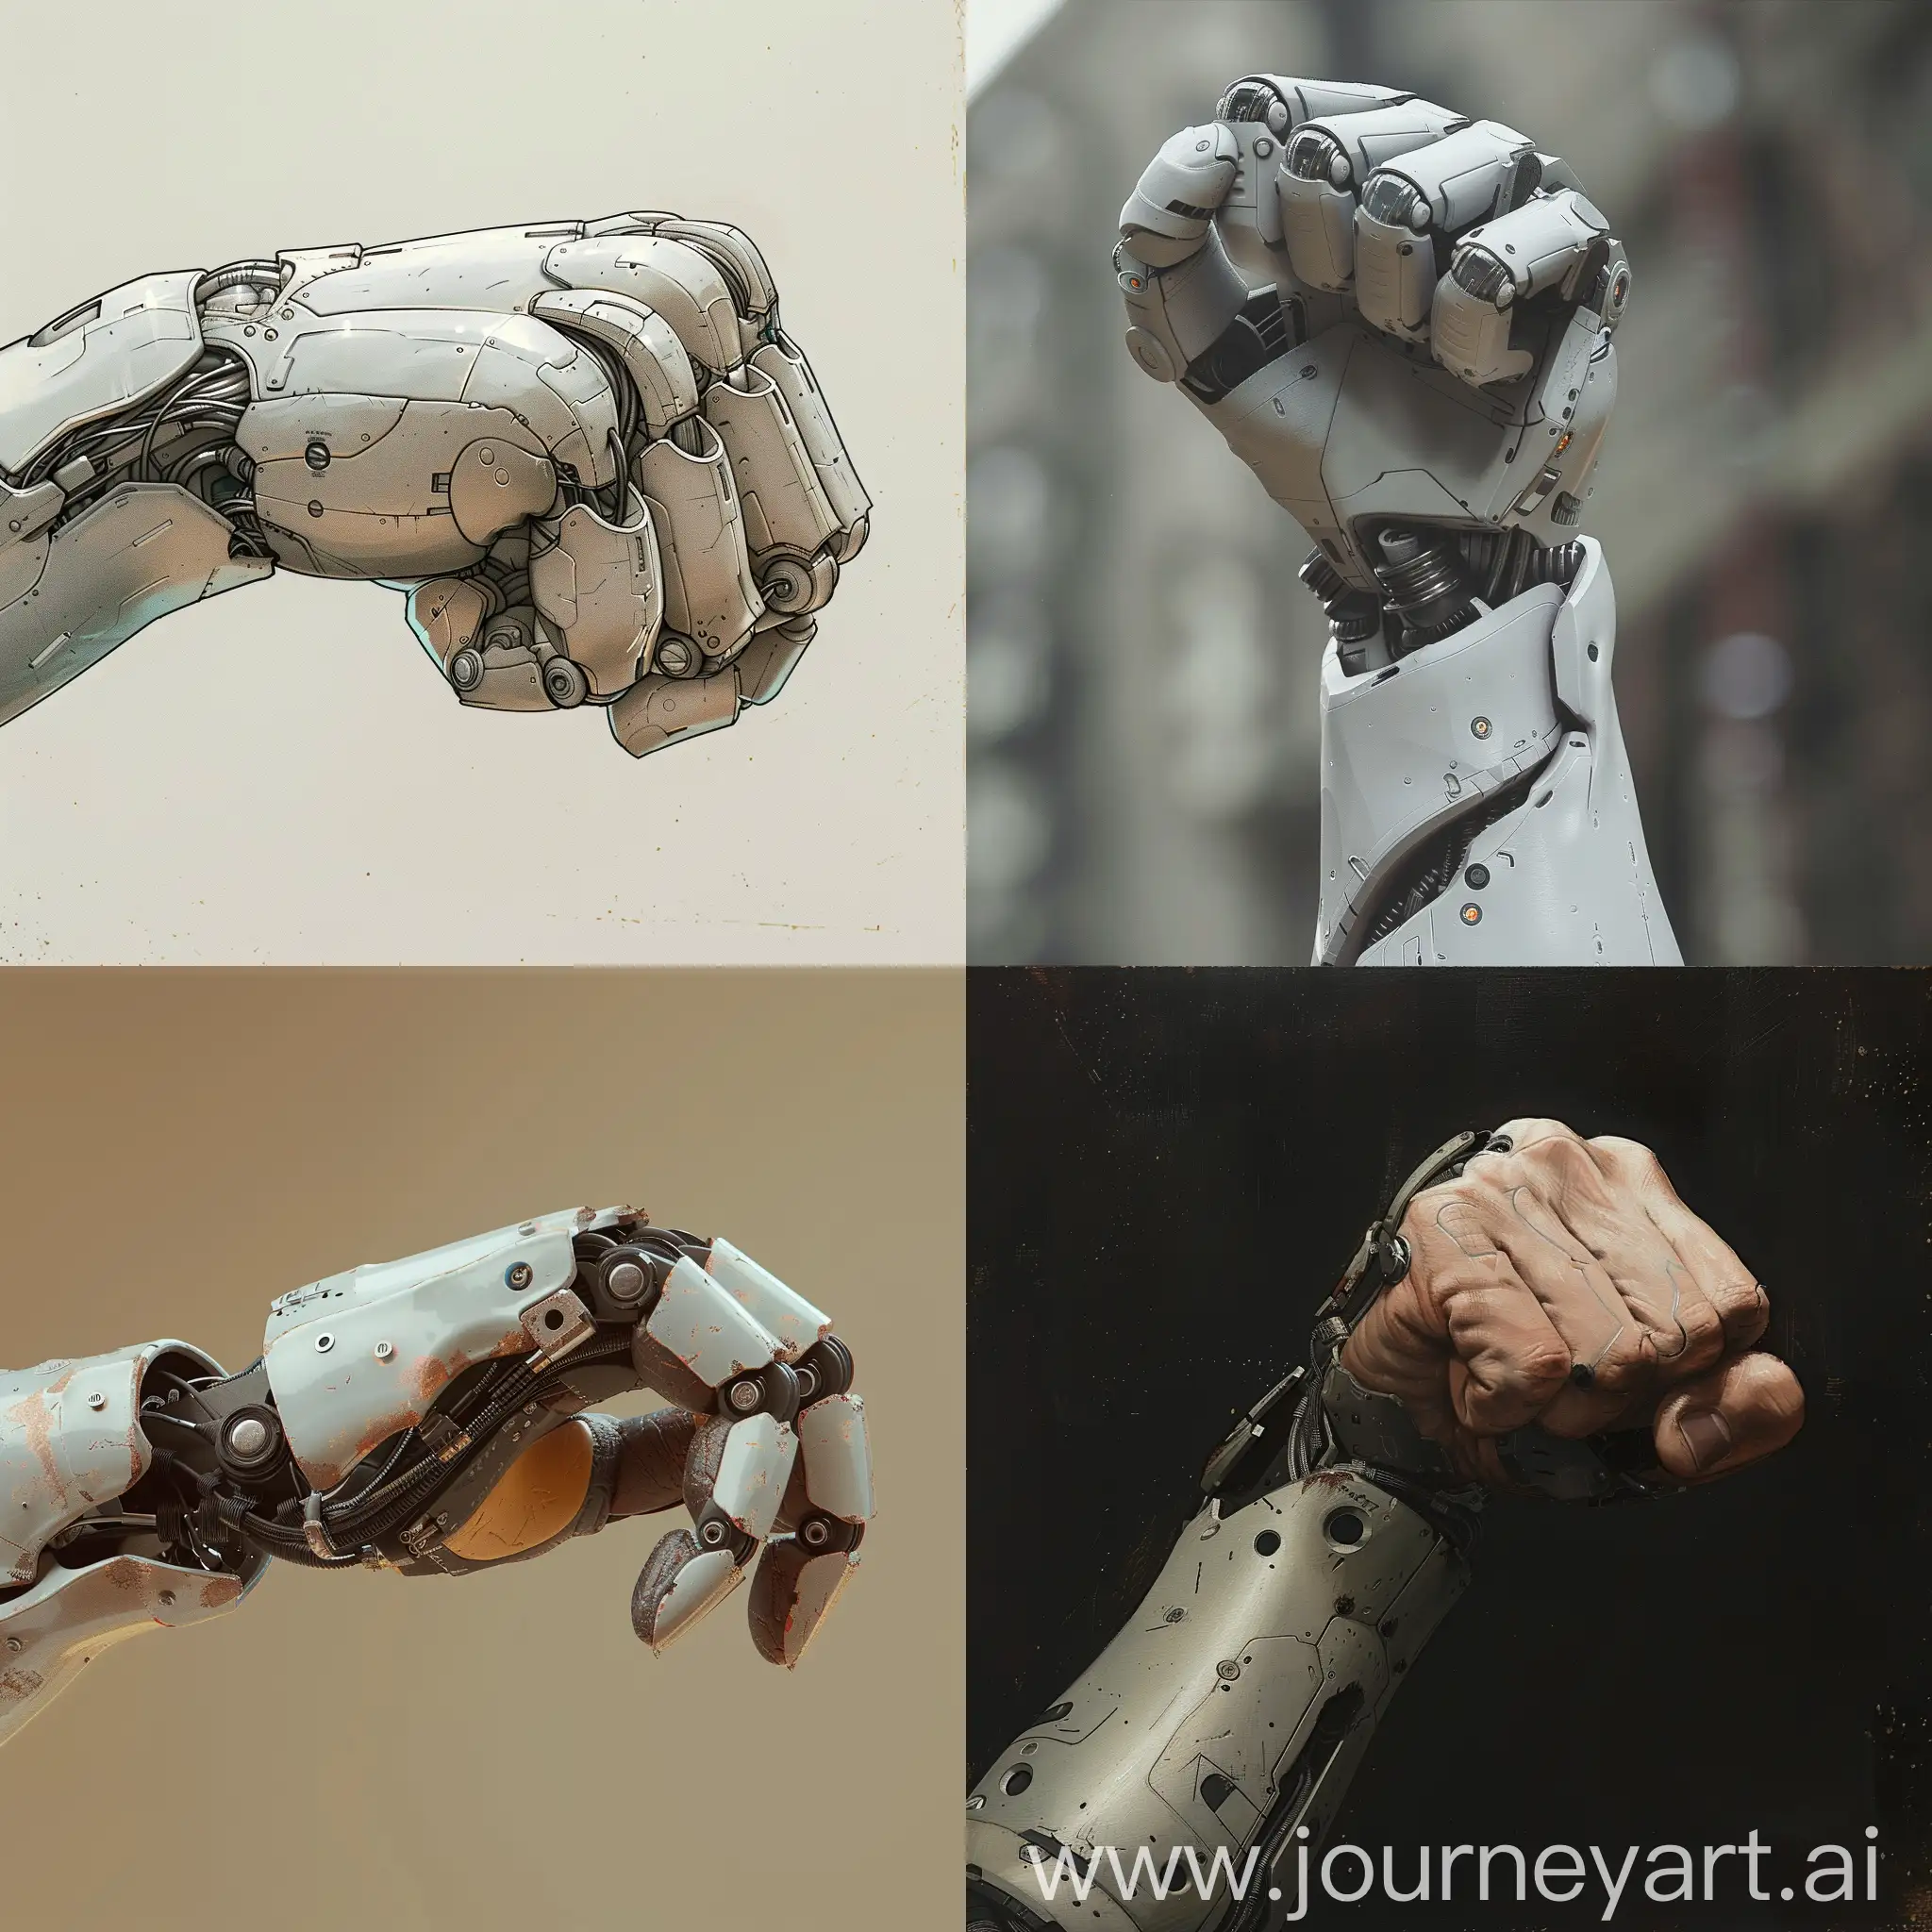 Biomechanical-Hand-Clenches-in-a-SemiHumanoid-Gesture